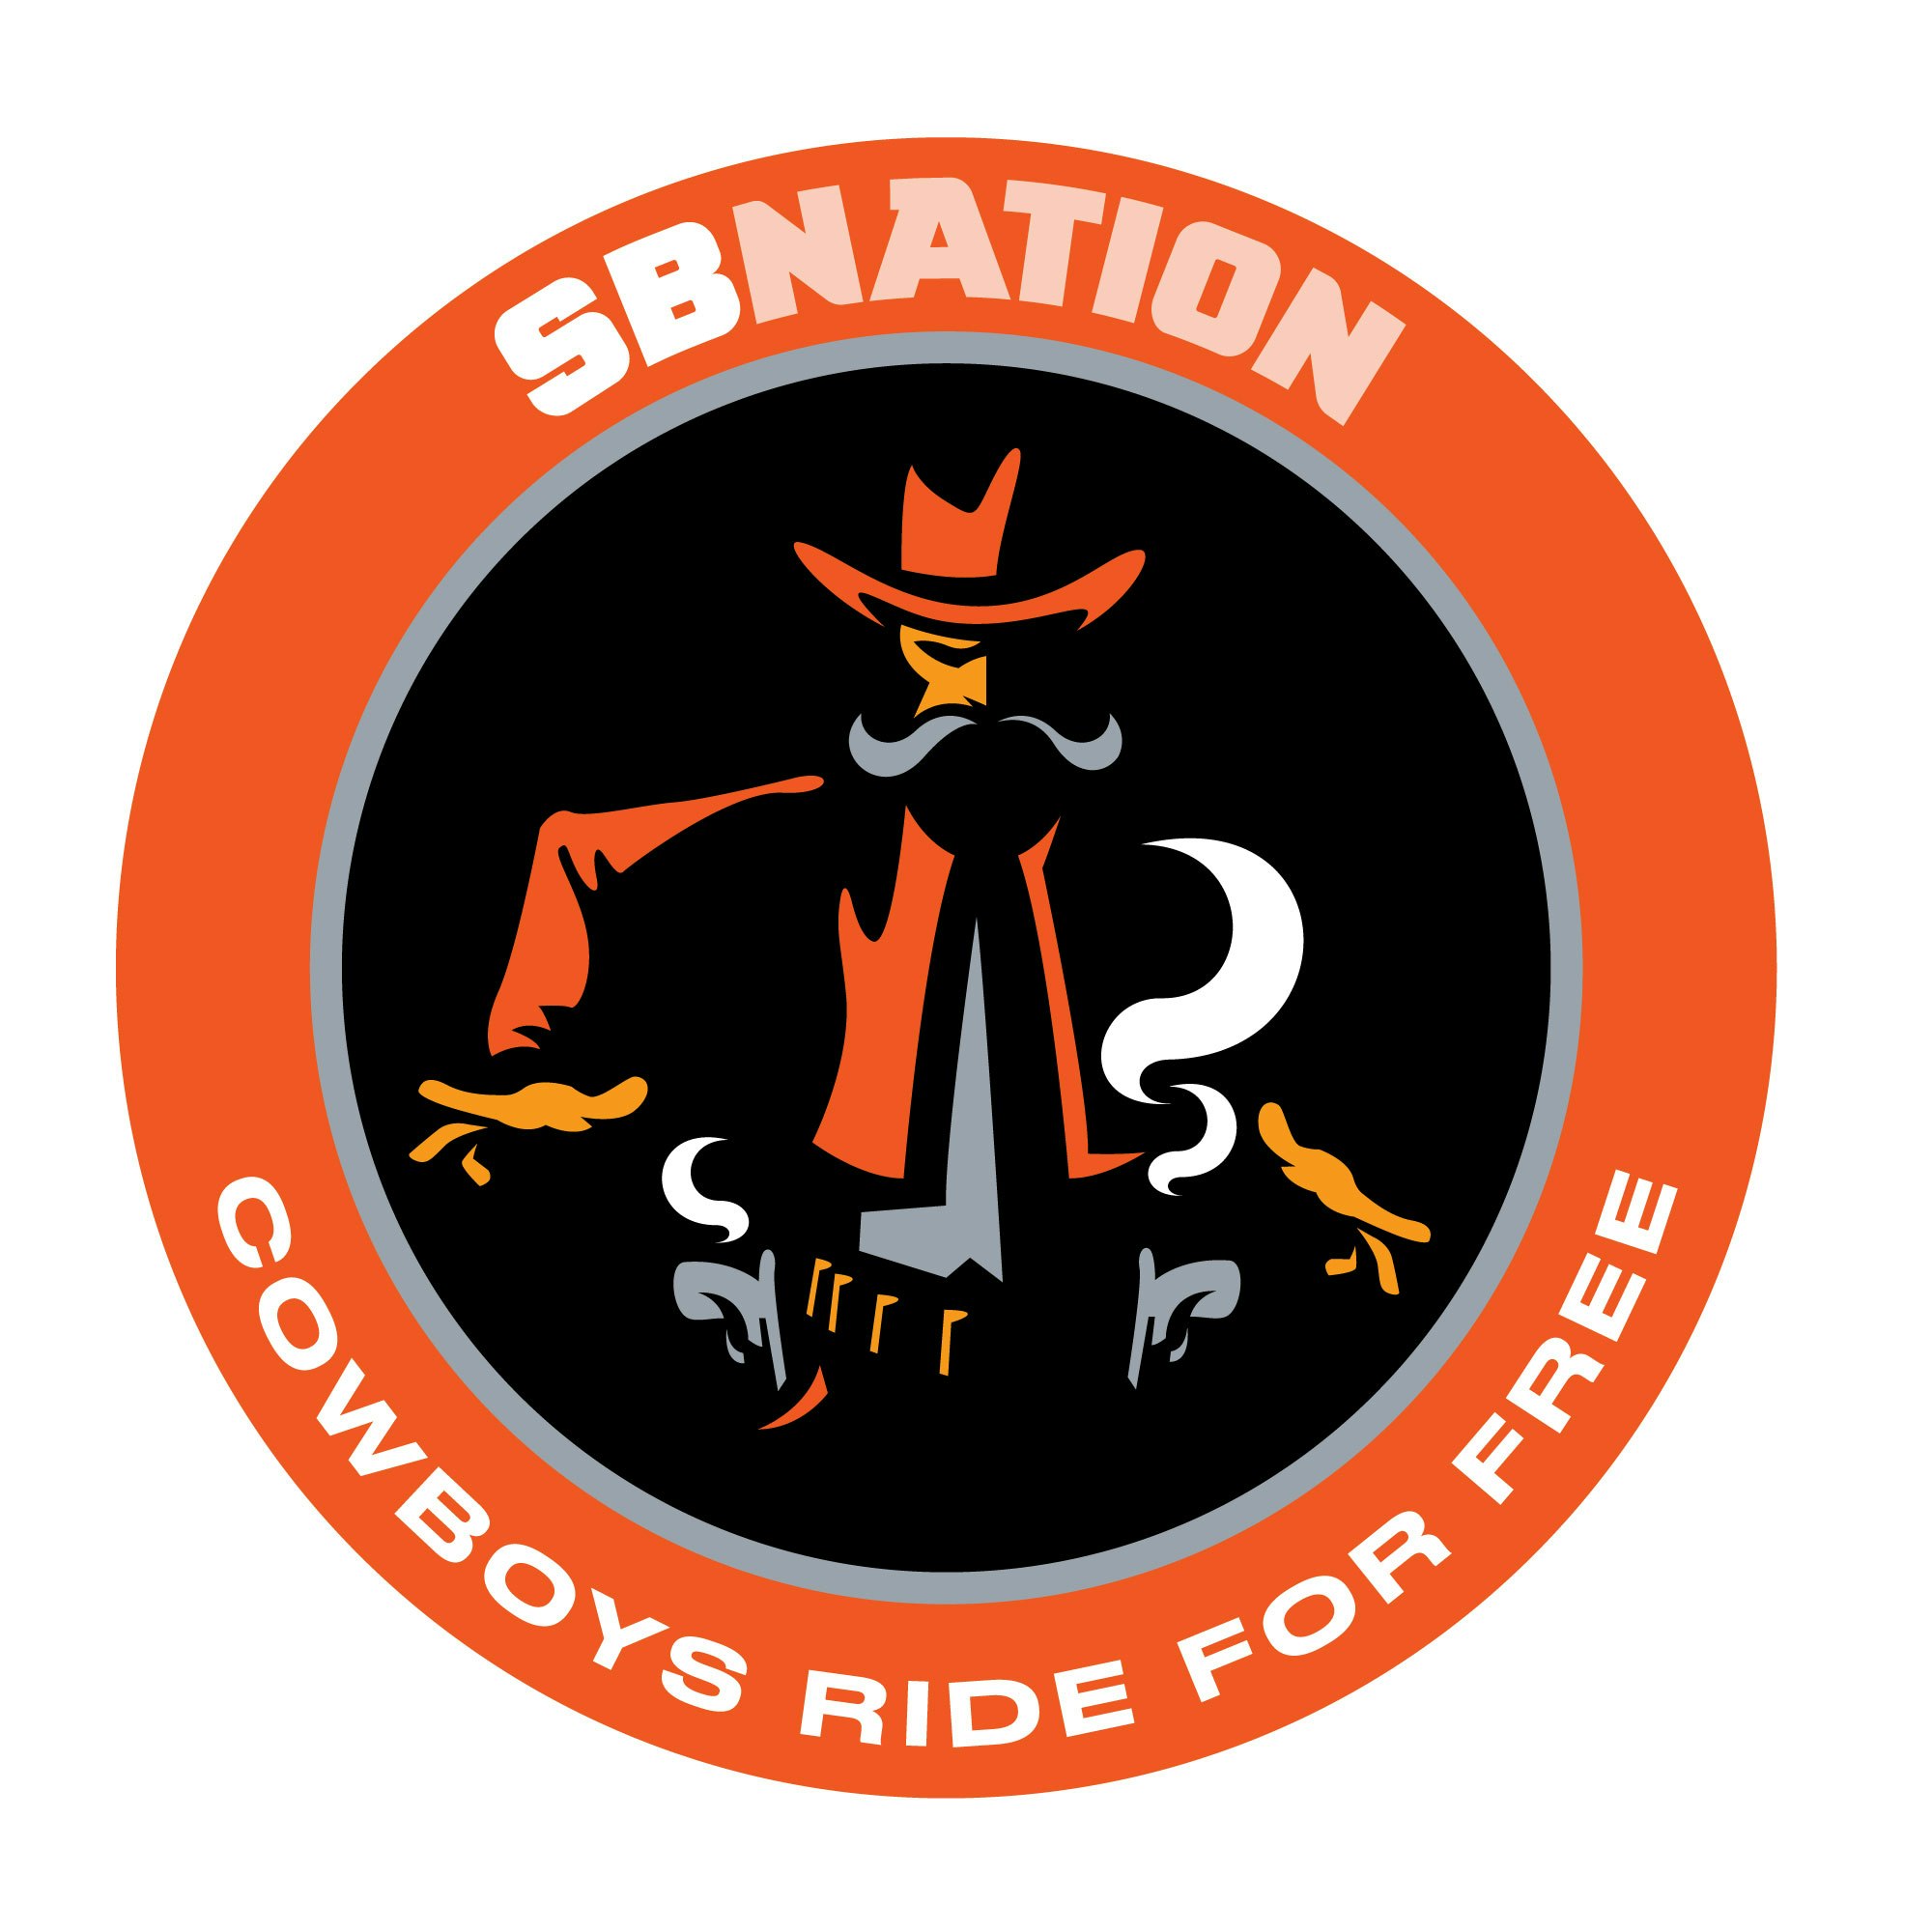 Cowboys Ride For Free: for Oklahoma State Cowboys fans